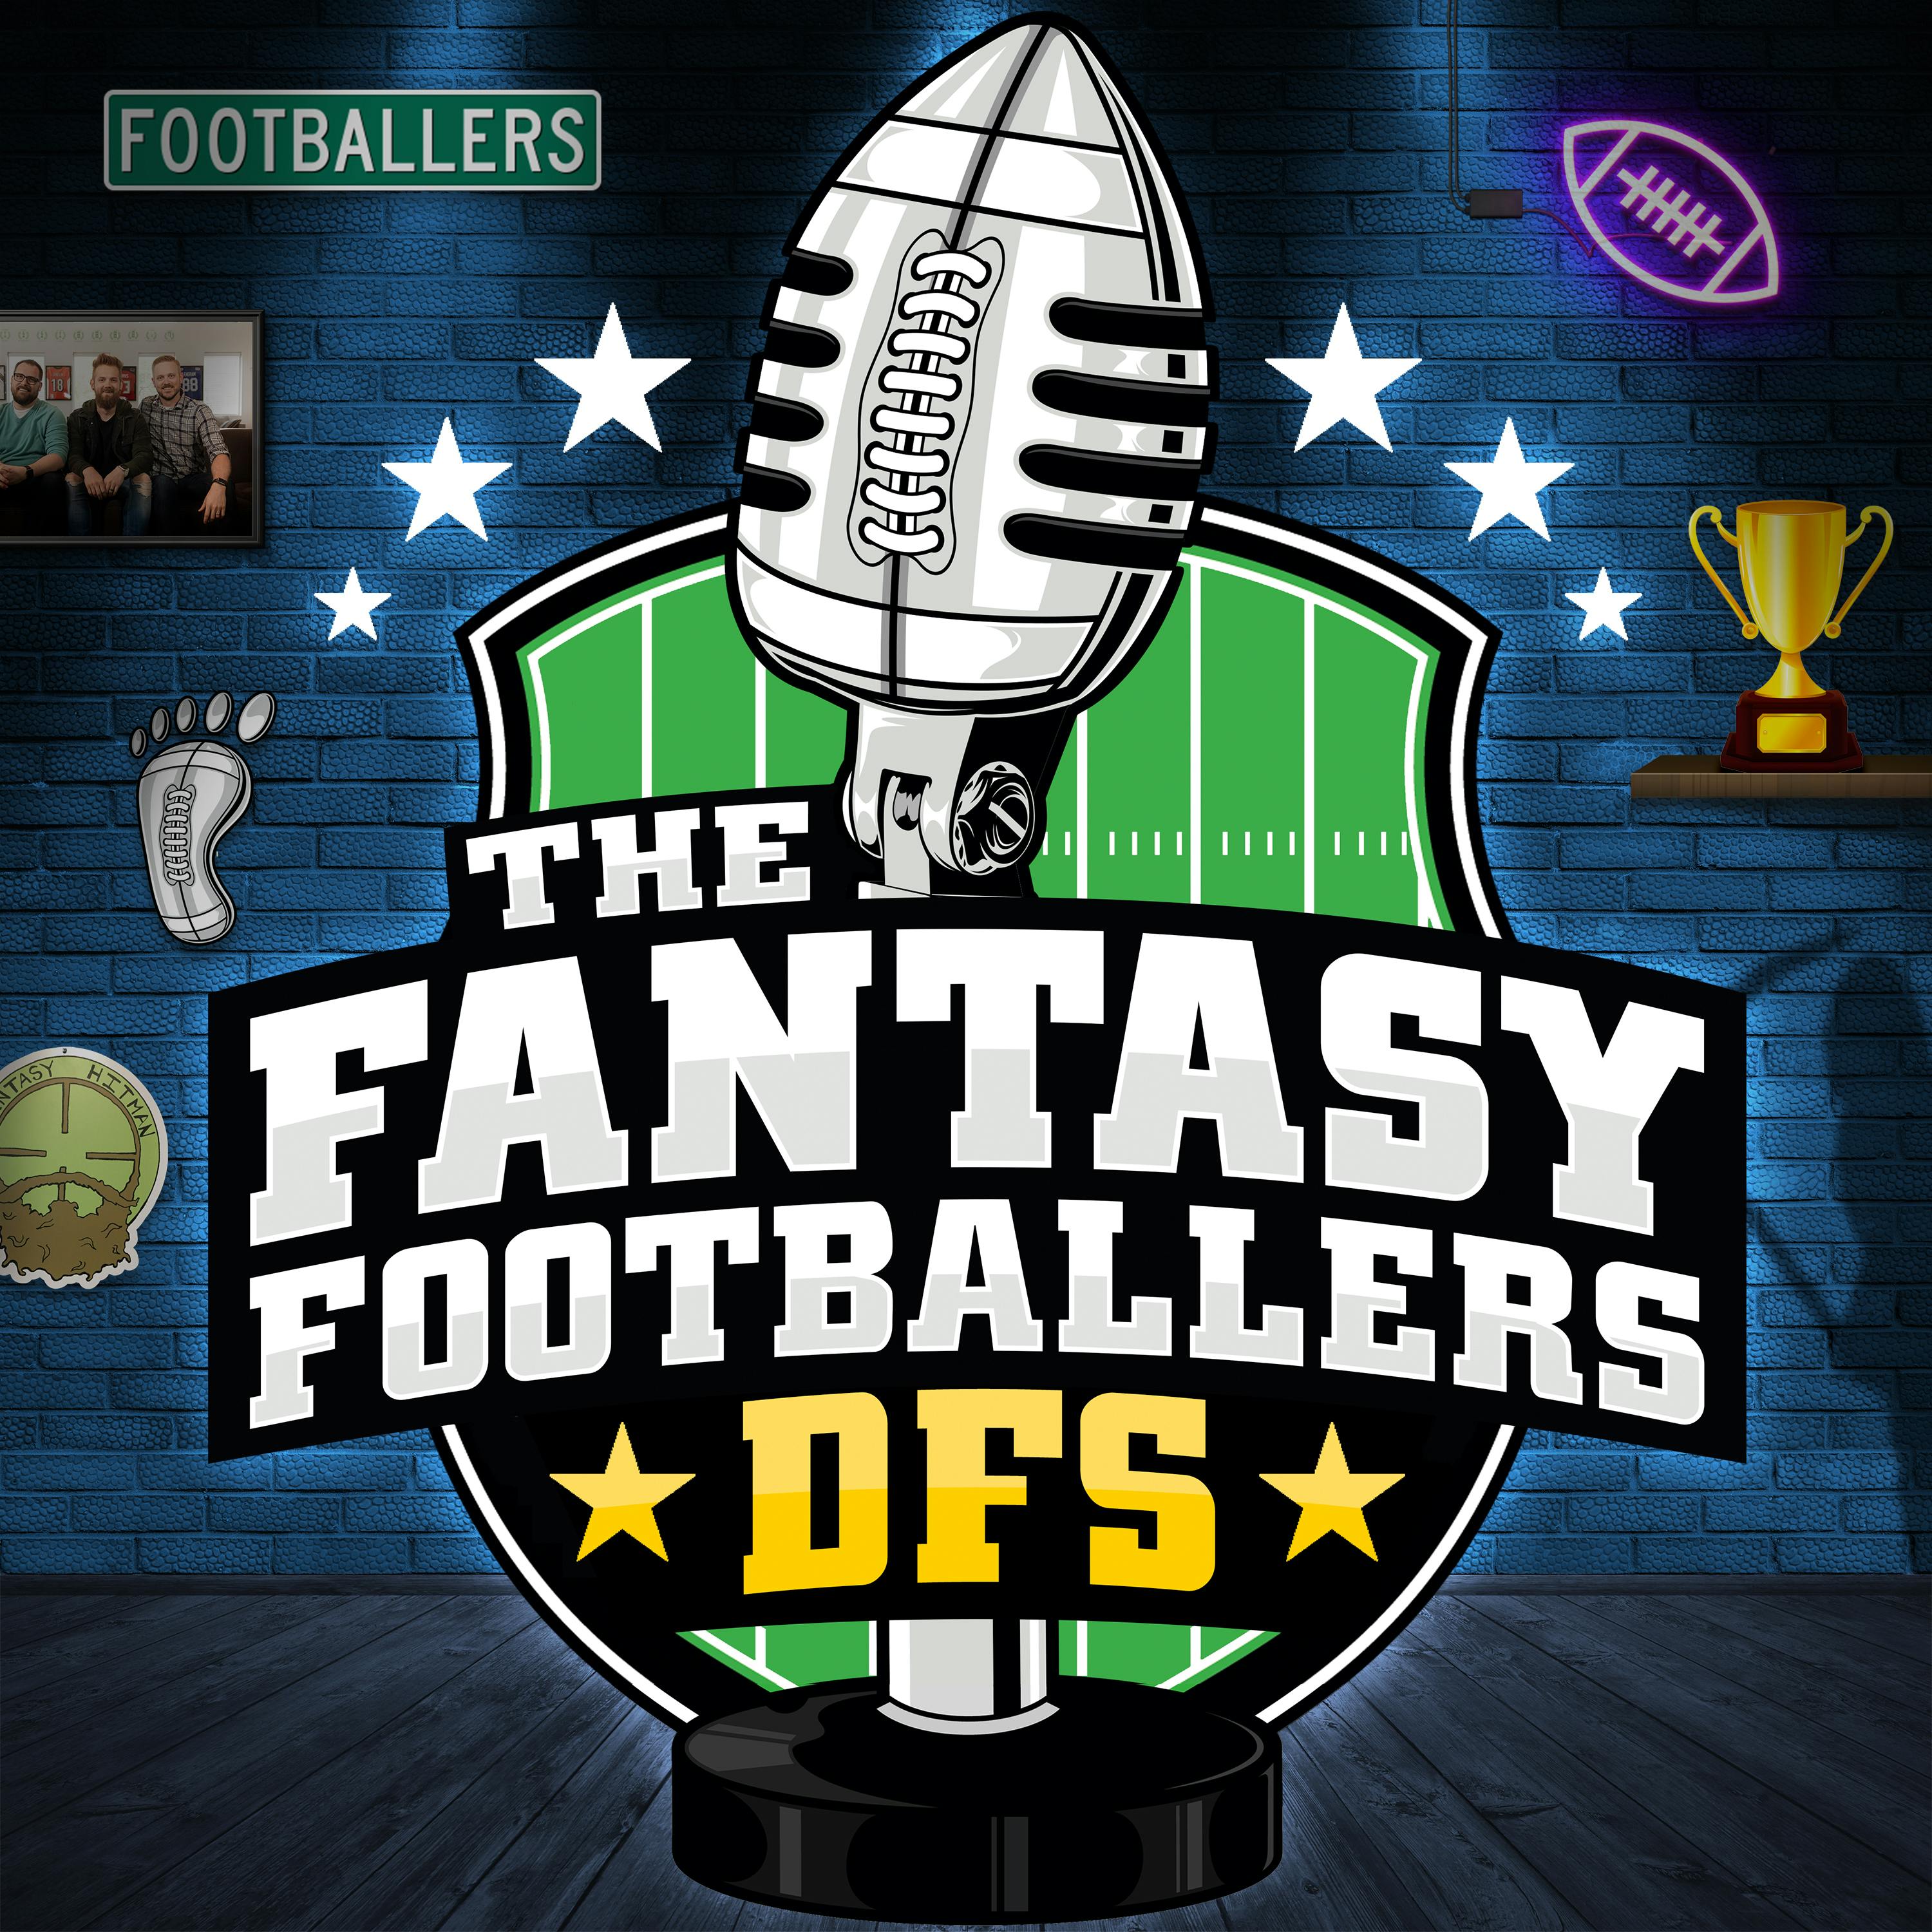 Week 18 DFS Preview + Salary Standouts - Fantasy Football DFS